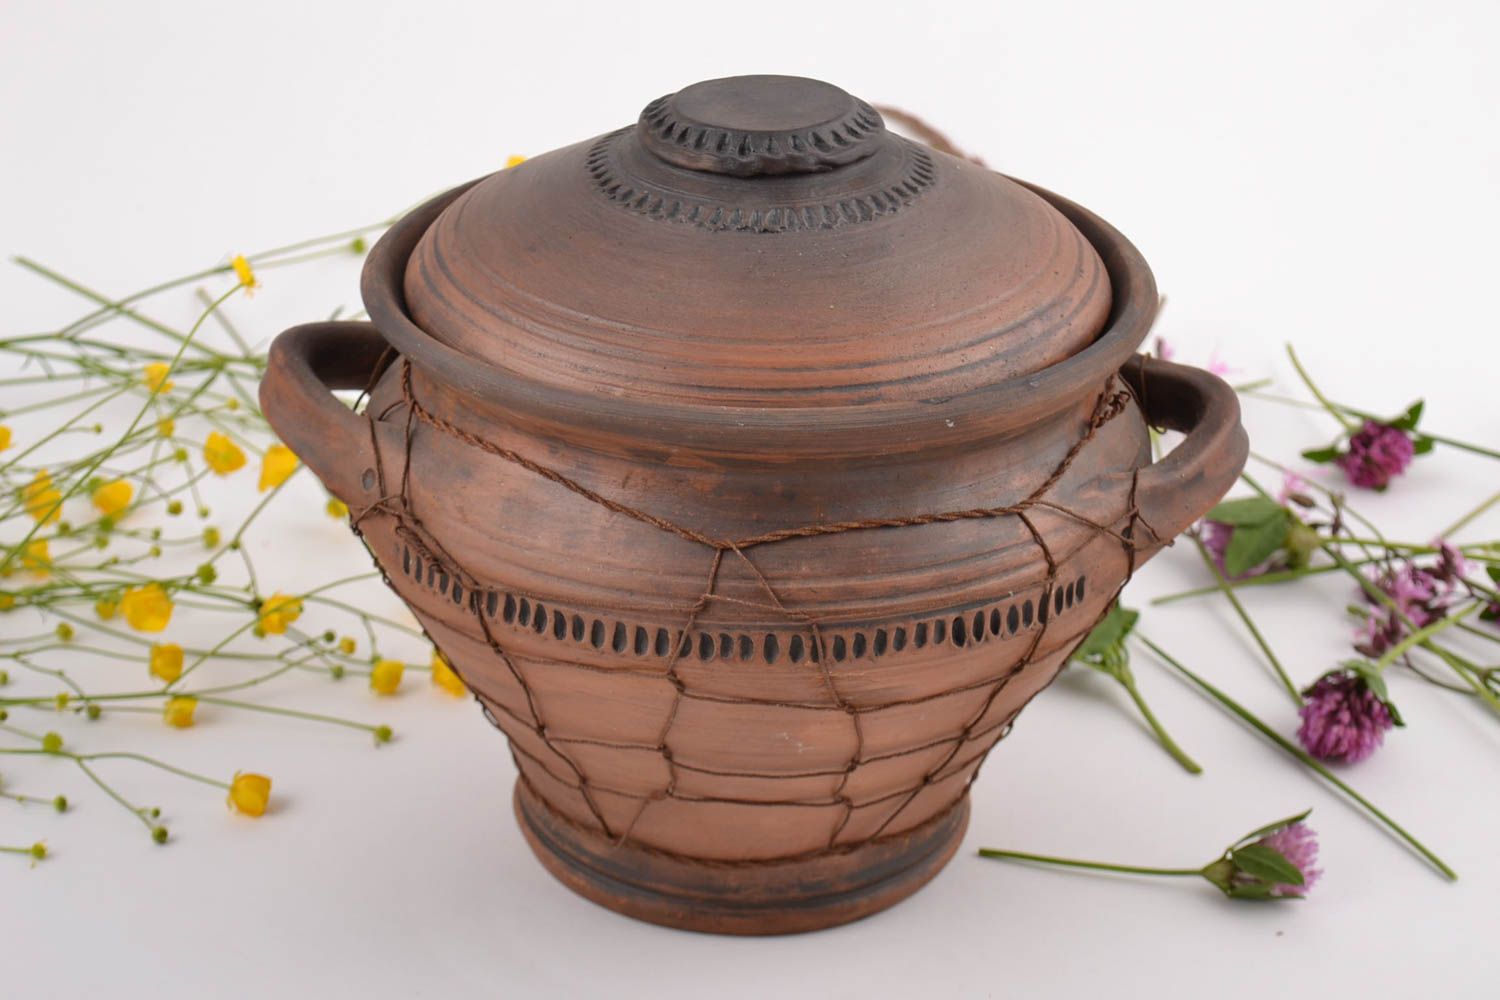 85 oz large clay pot for baking with two handles 3,4 lb photo 1